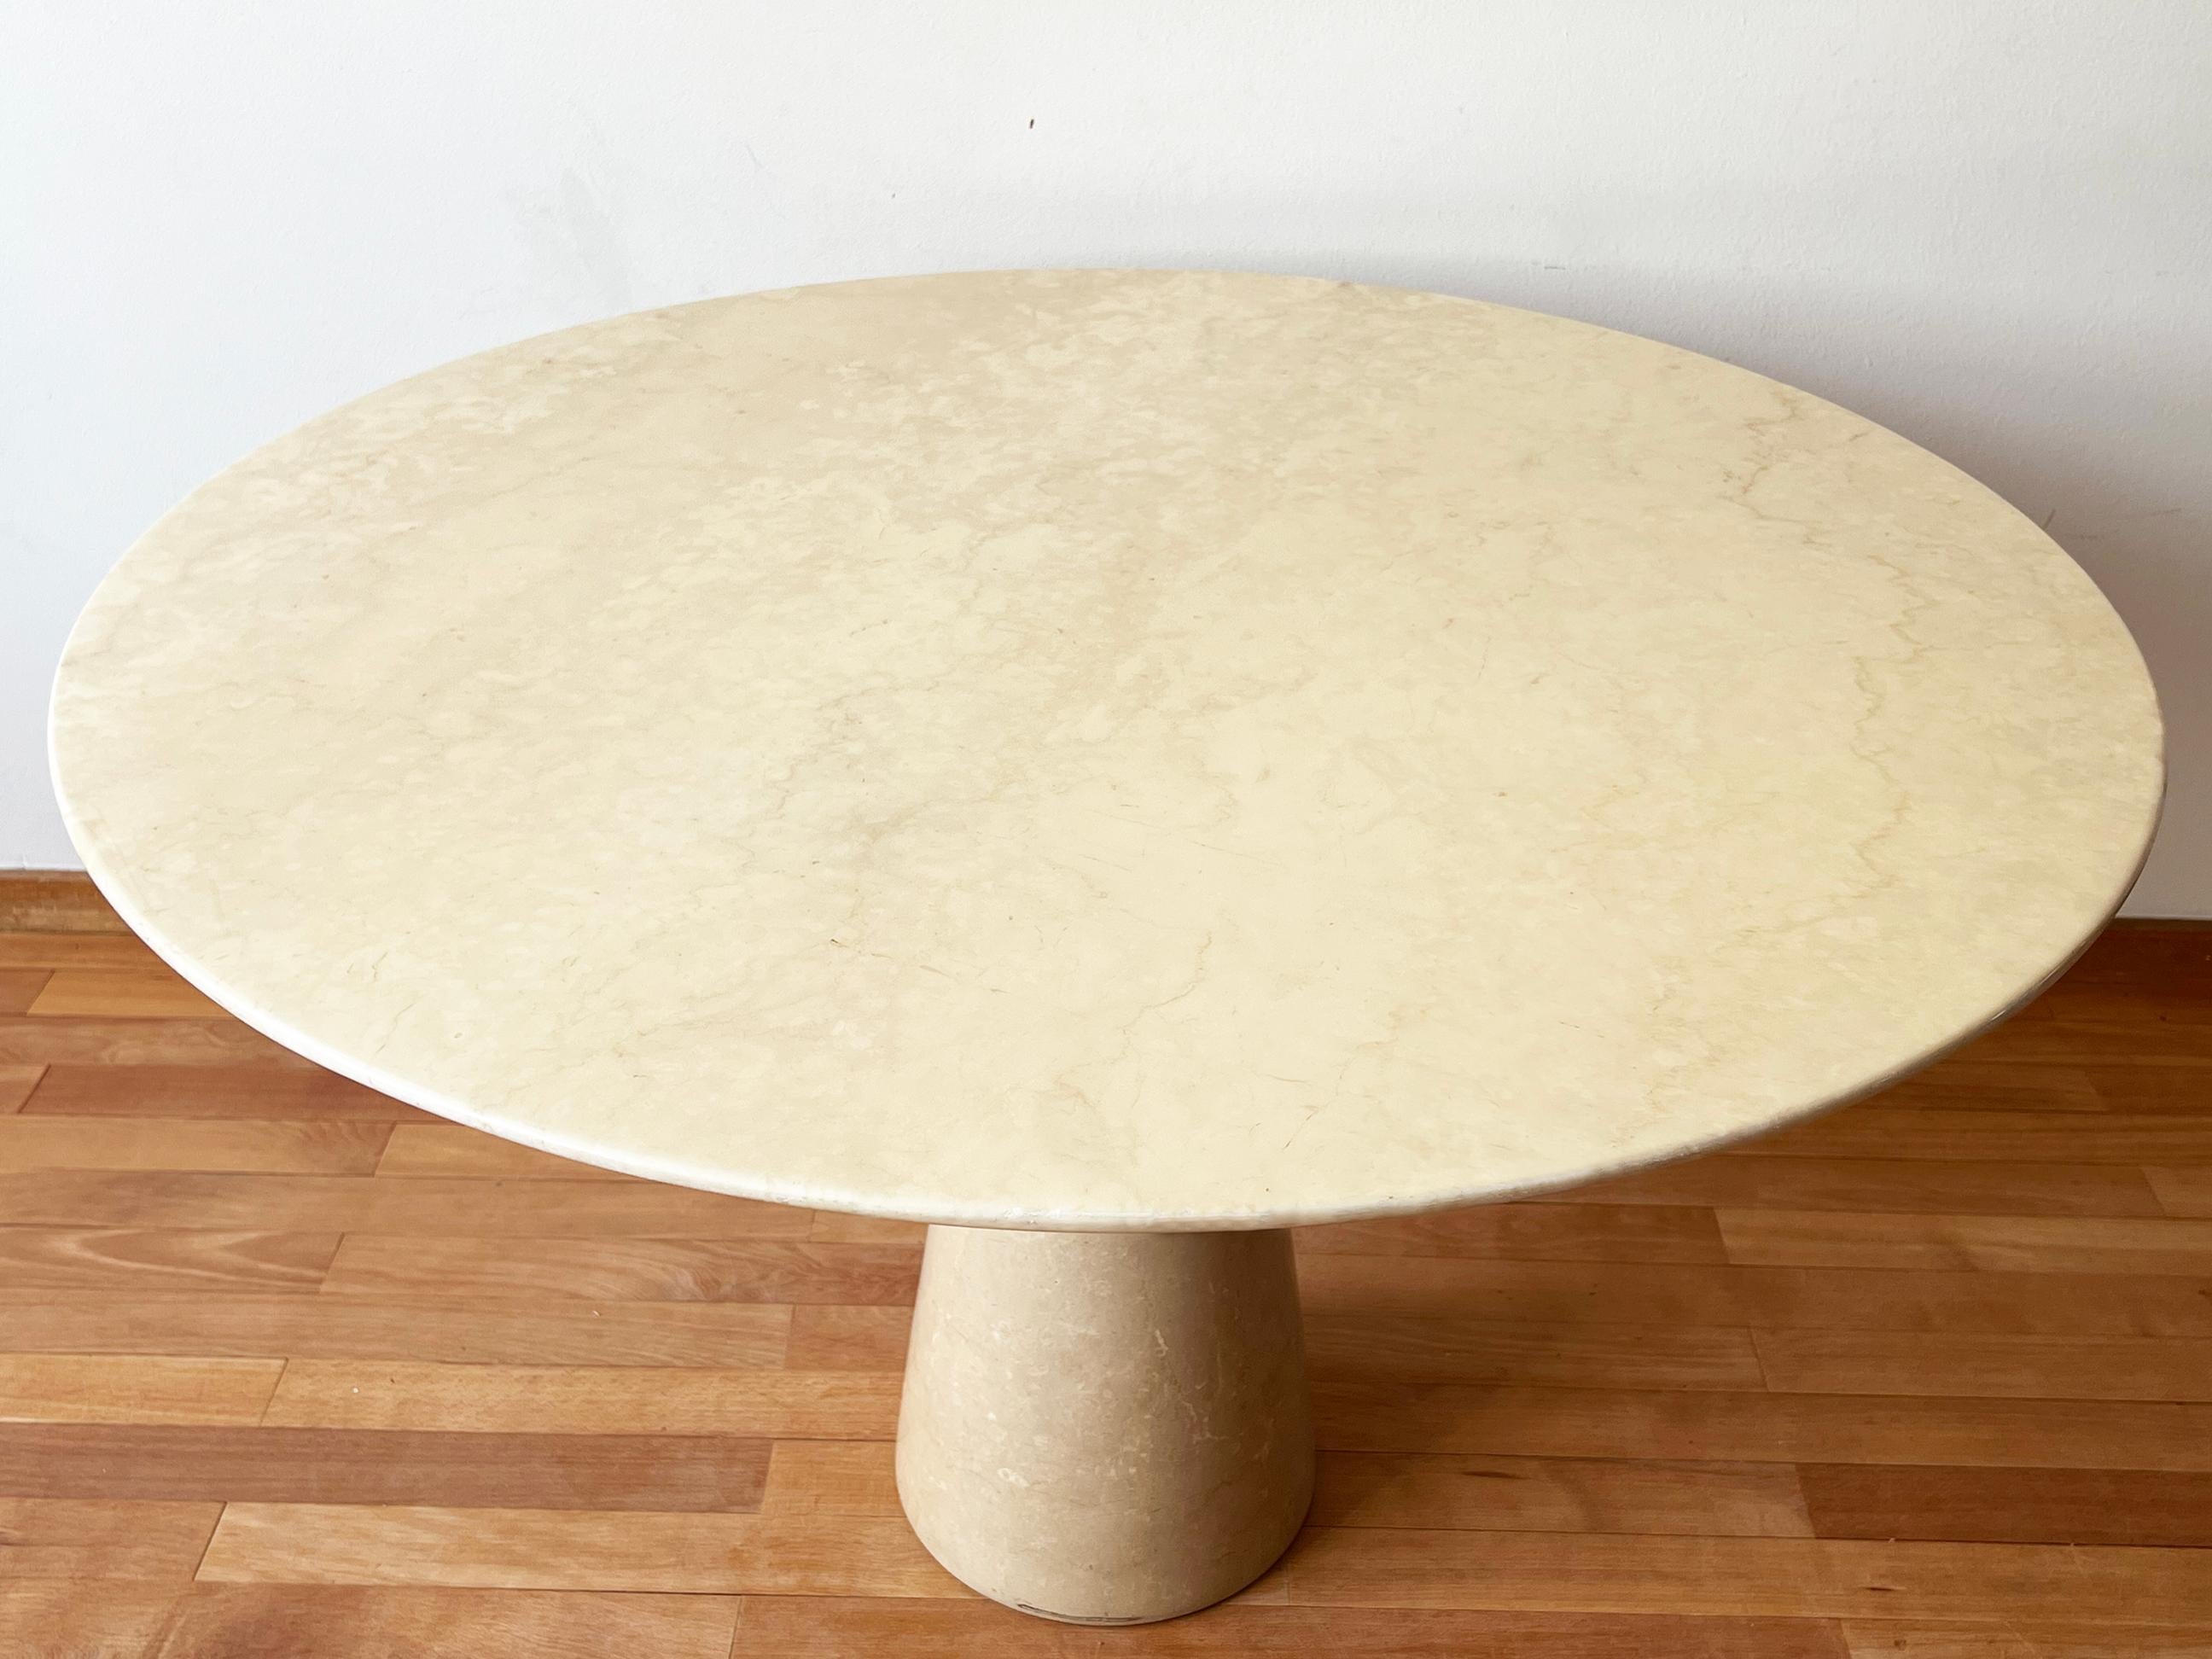 One of a kind Angelo Mangiarotti designer 1970s round Solid marble dining table with sculptural pedestal signature Mangiarotti base

This table and base are In very good vintage condition, original from the 1970s.  Acquired along with many top